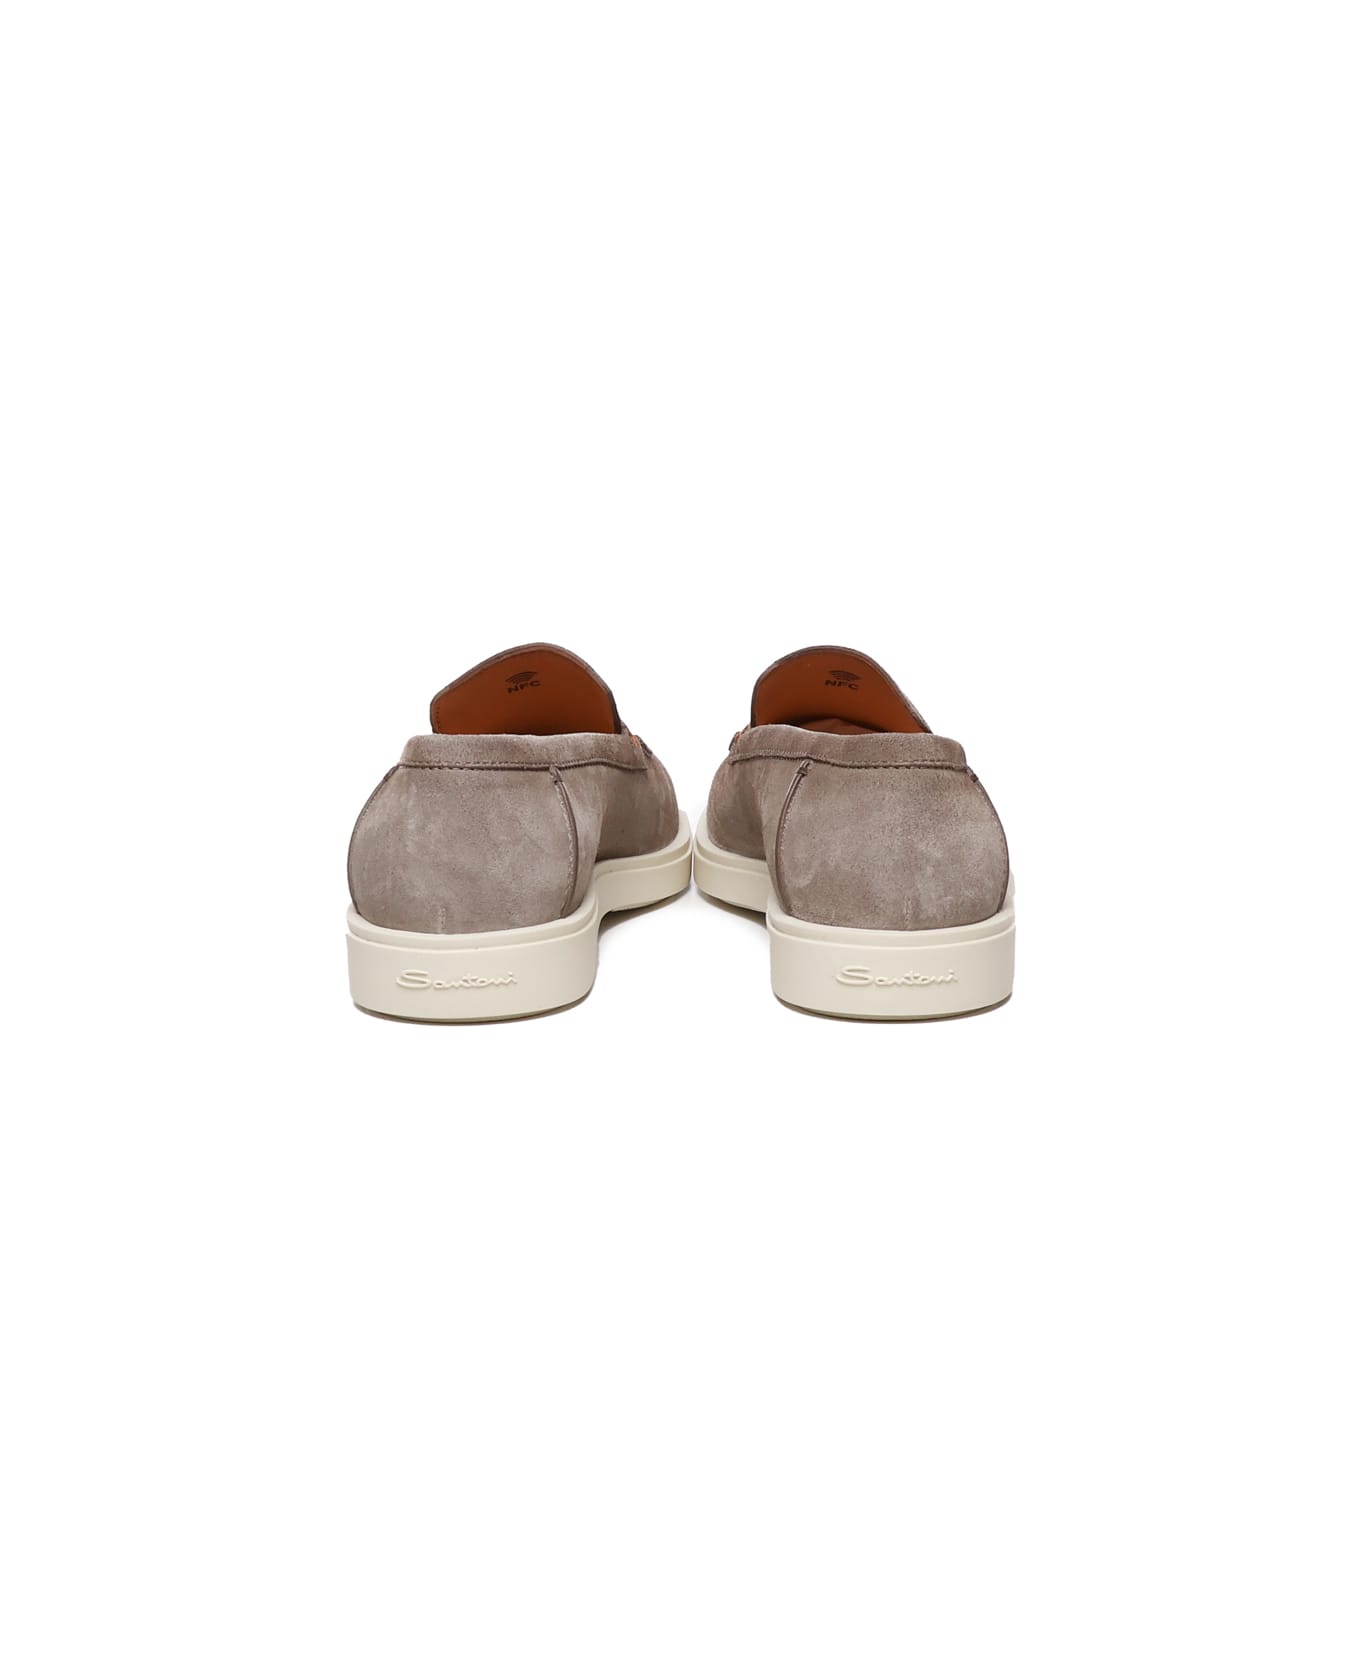 Santoni Loafers In Taupe Nabuk - Taupe